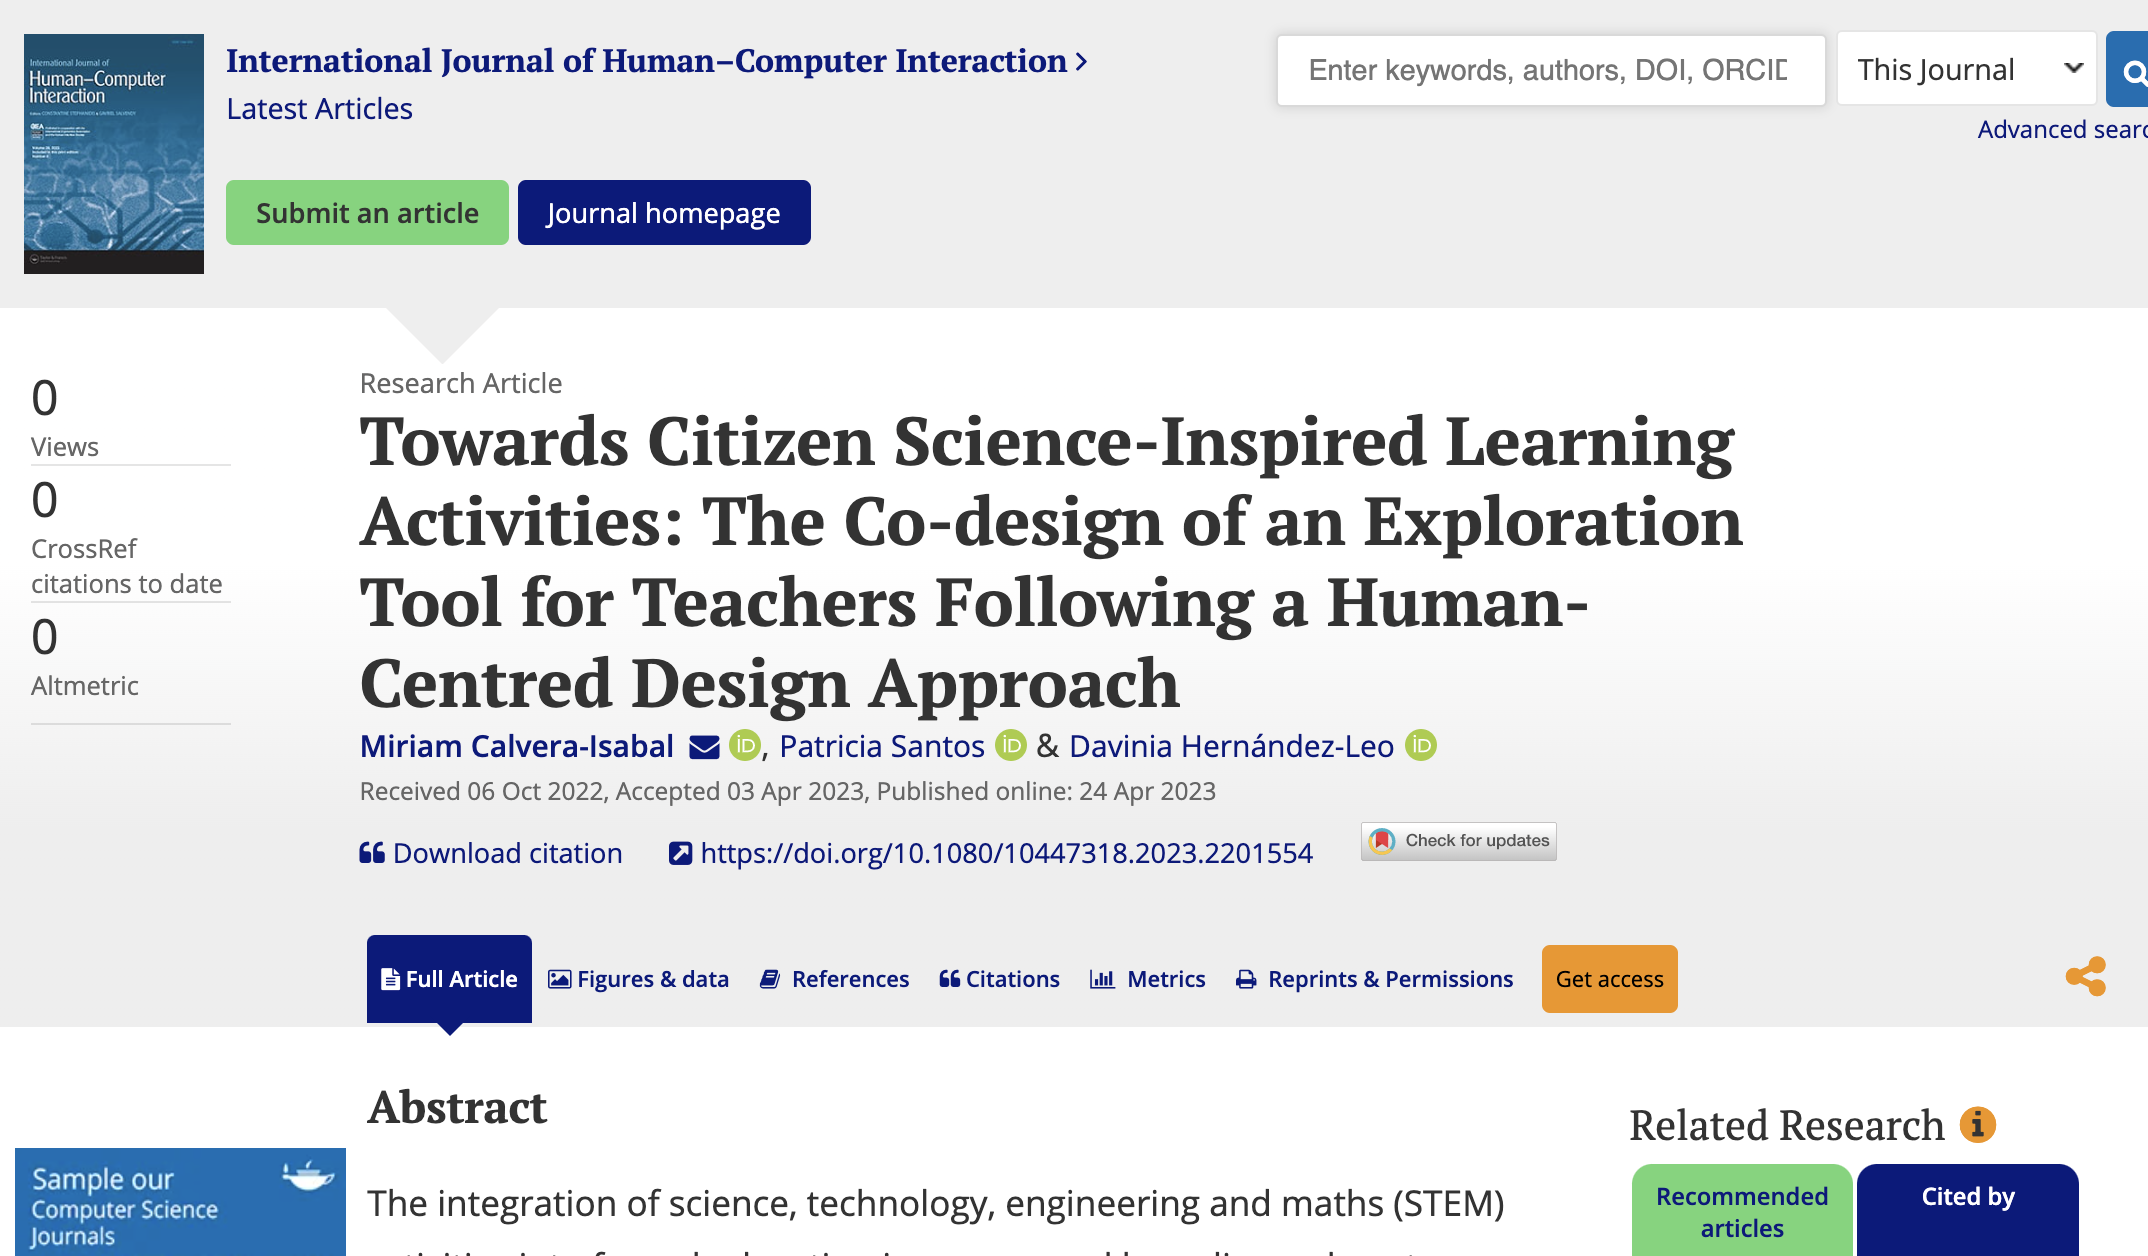 New publication: Towards Citizen Science-Inspired Learning Activities: The Co-design of an Exploration Tool for Teachers Following a Human-Centred Design Approach